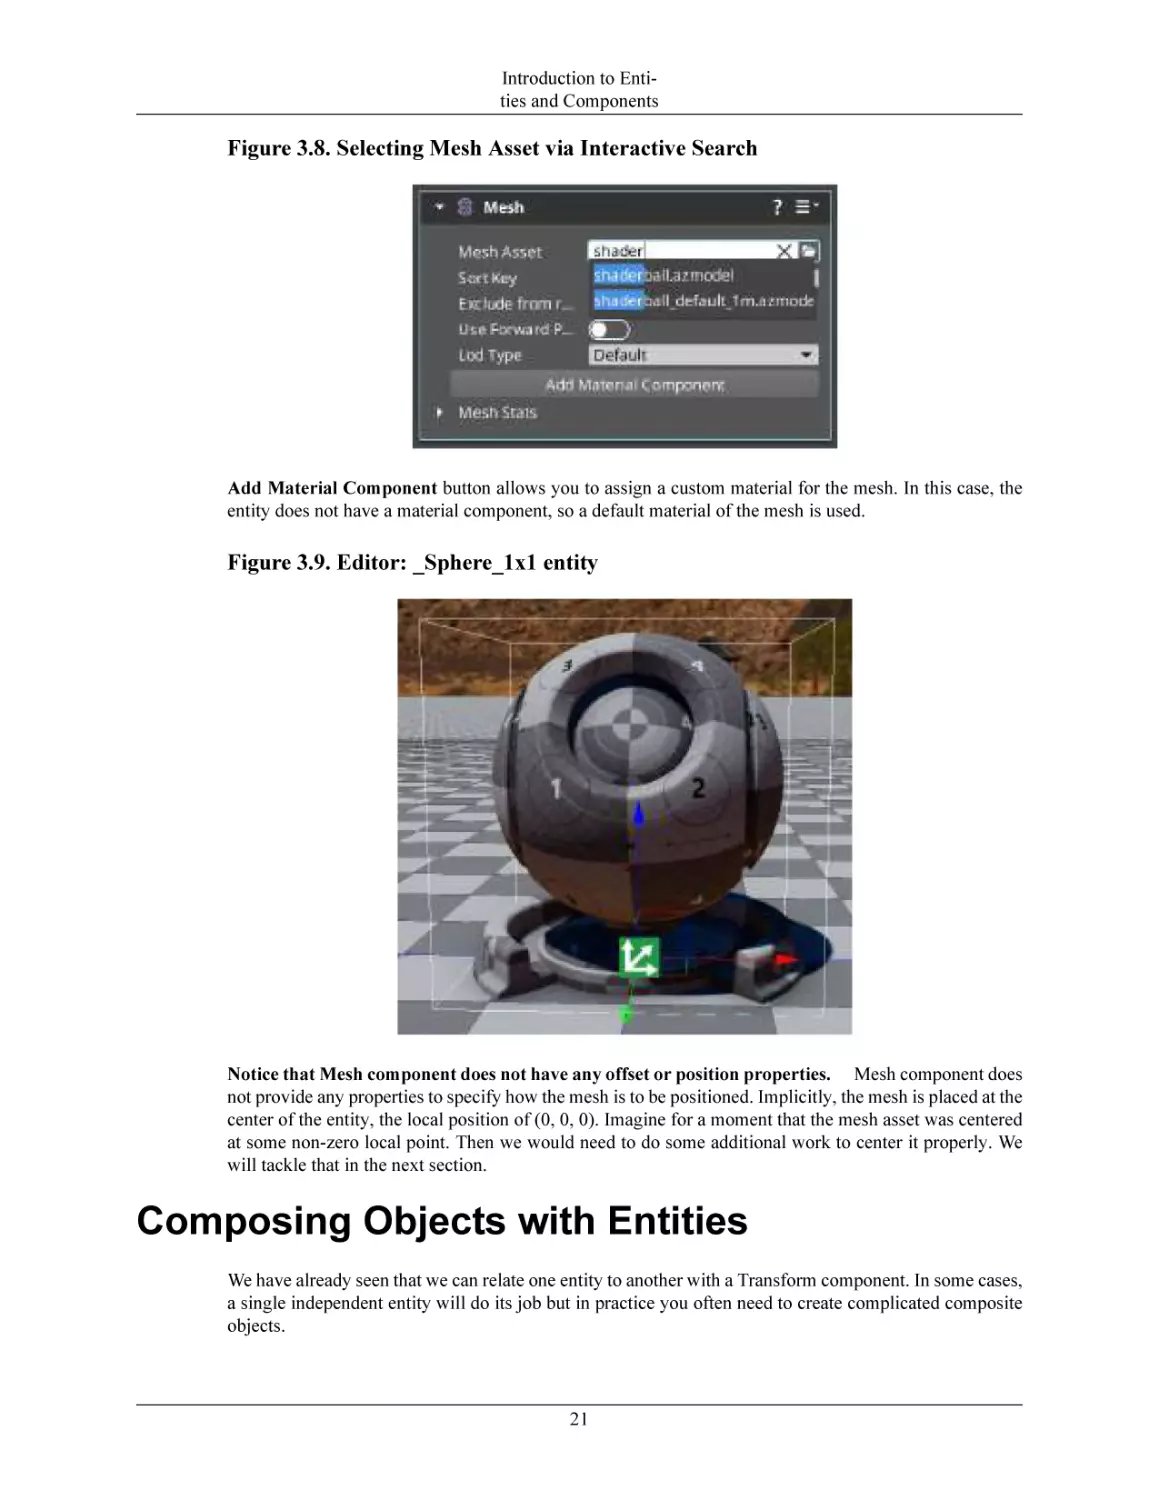 Composing Objects with Entities